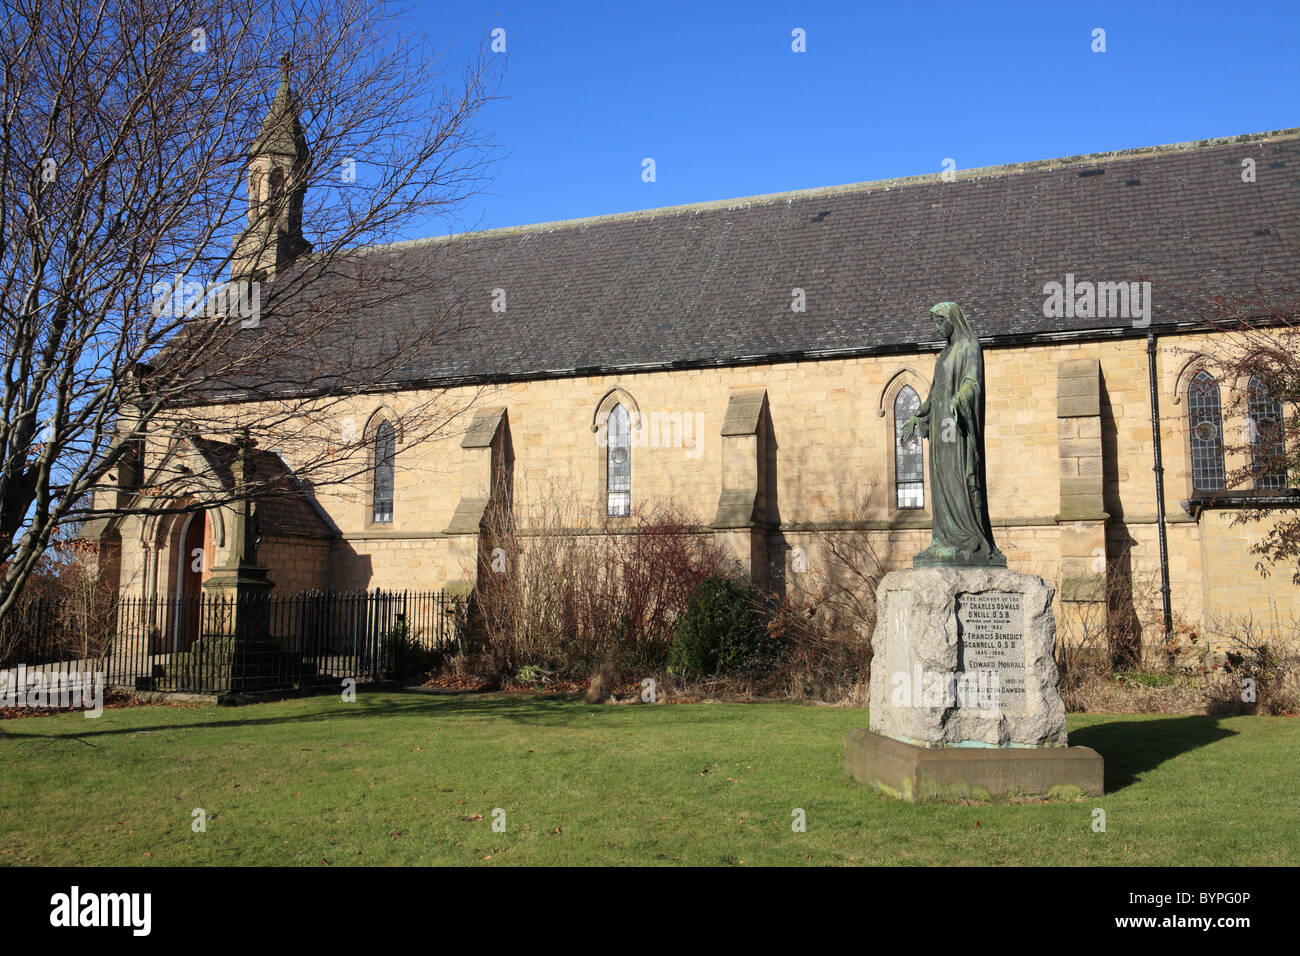 St Joseph's RC church and of statue Our Lady, Birtley, north east England. Stock Photo